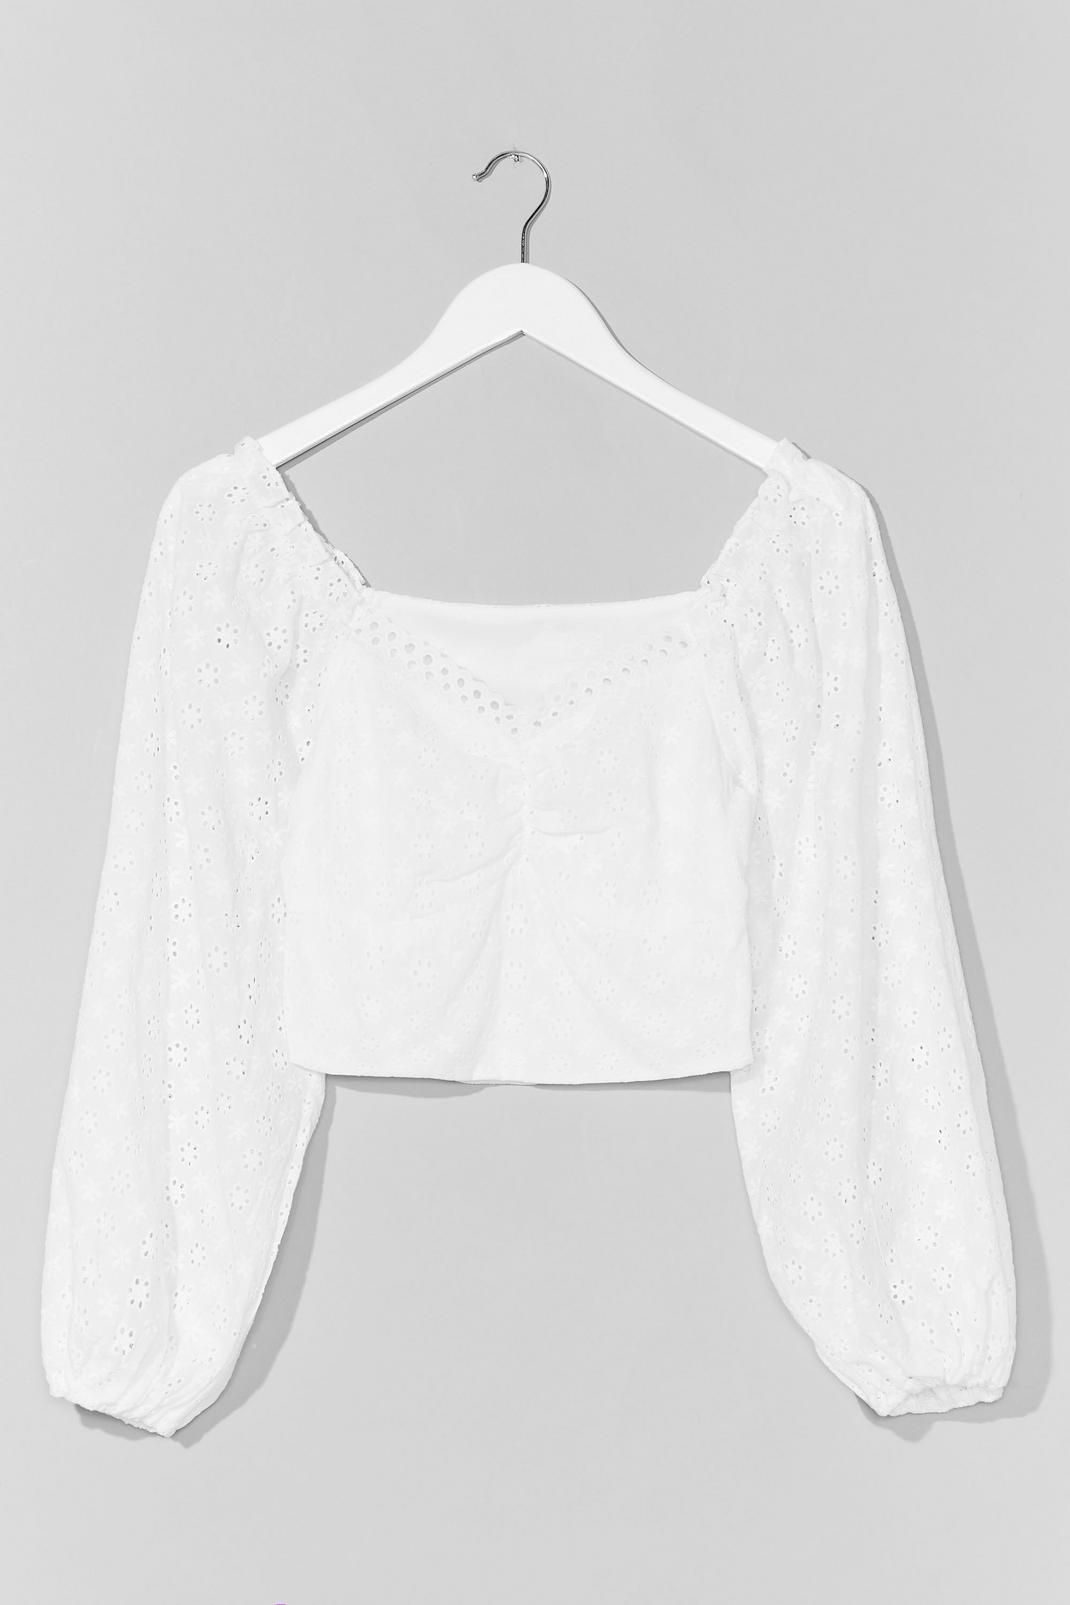 Some Day Balloon Broderie Anglaise Crop Top | Nasty Gal